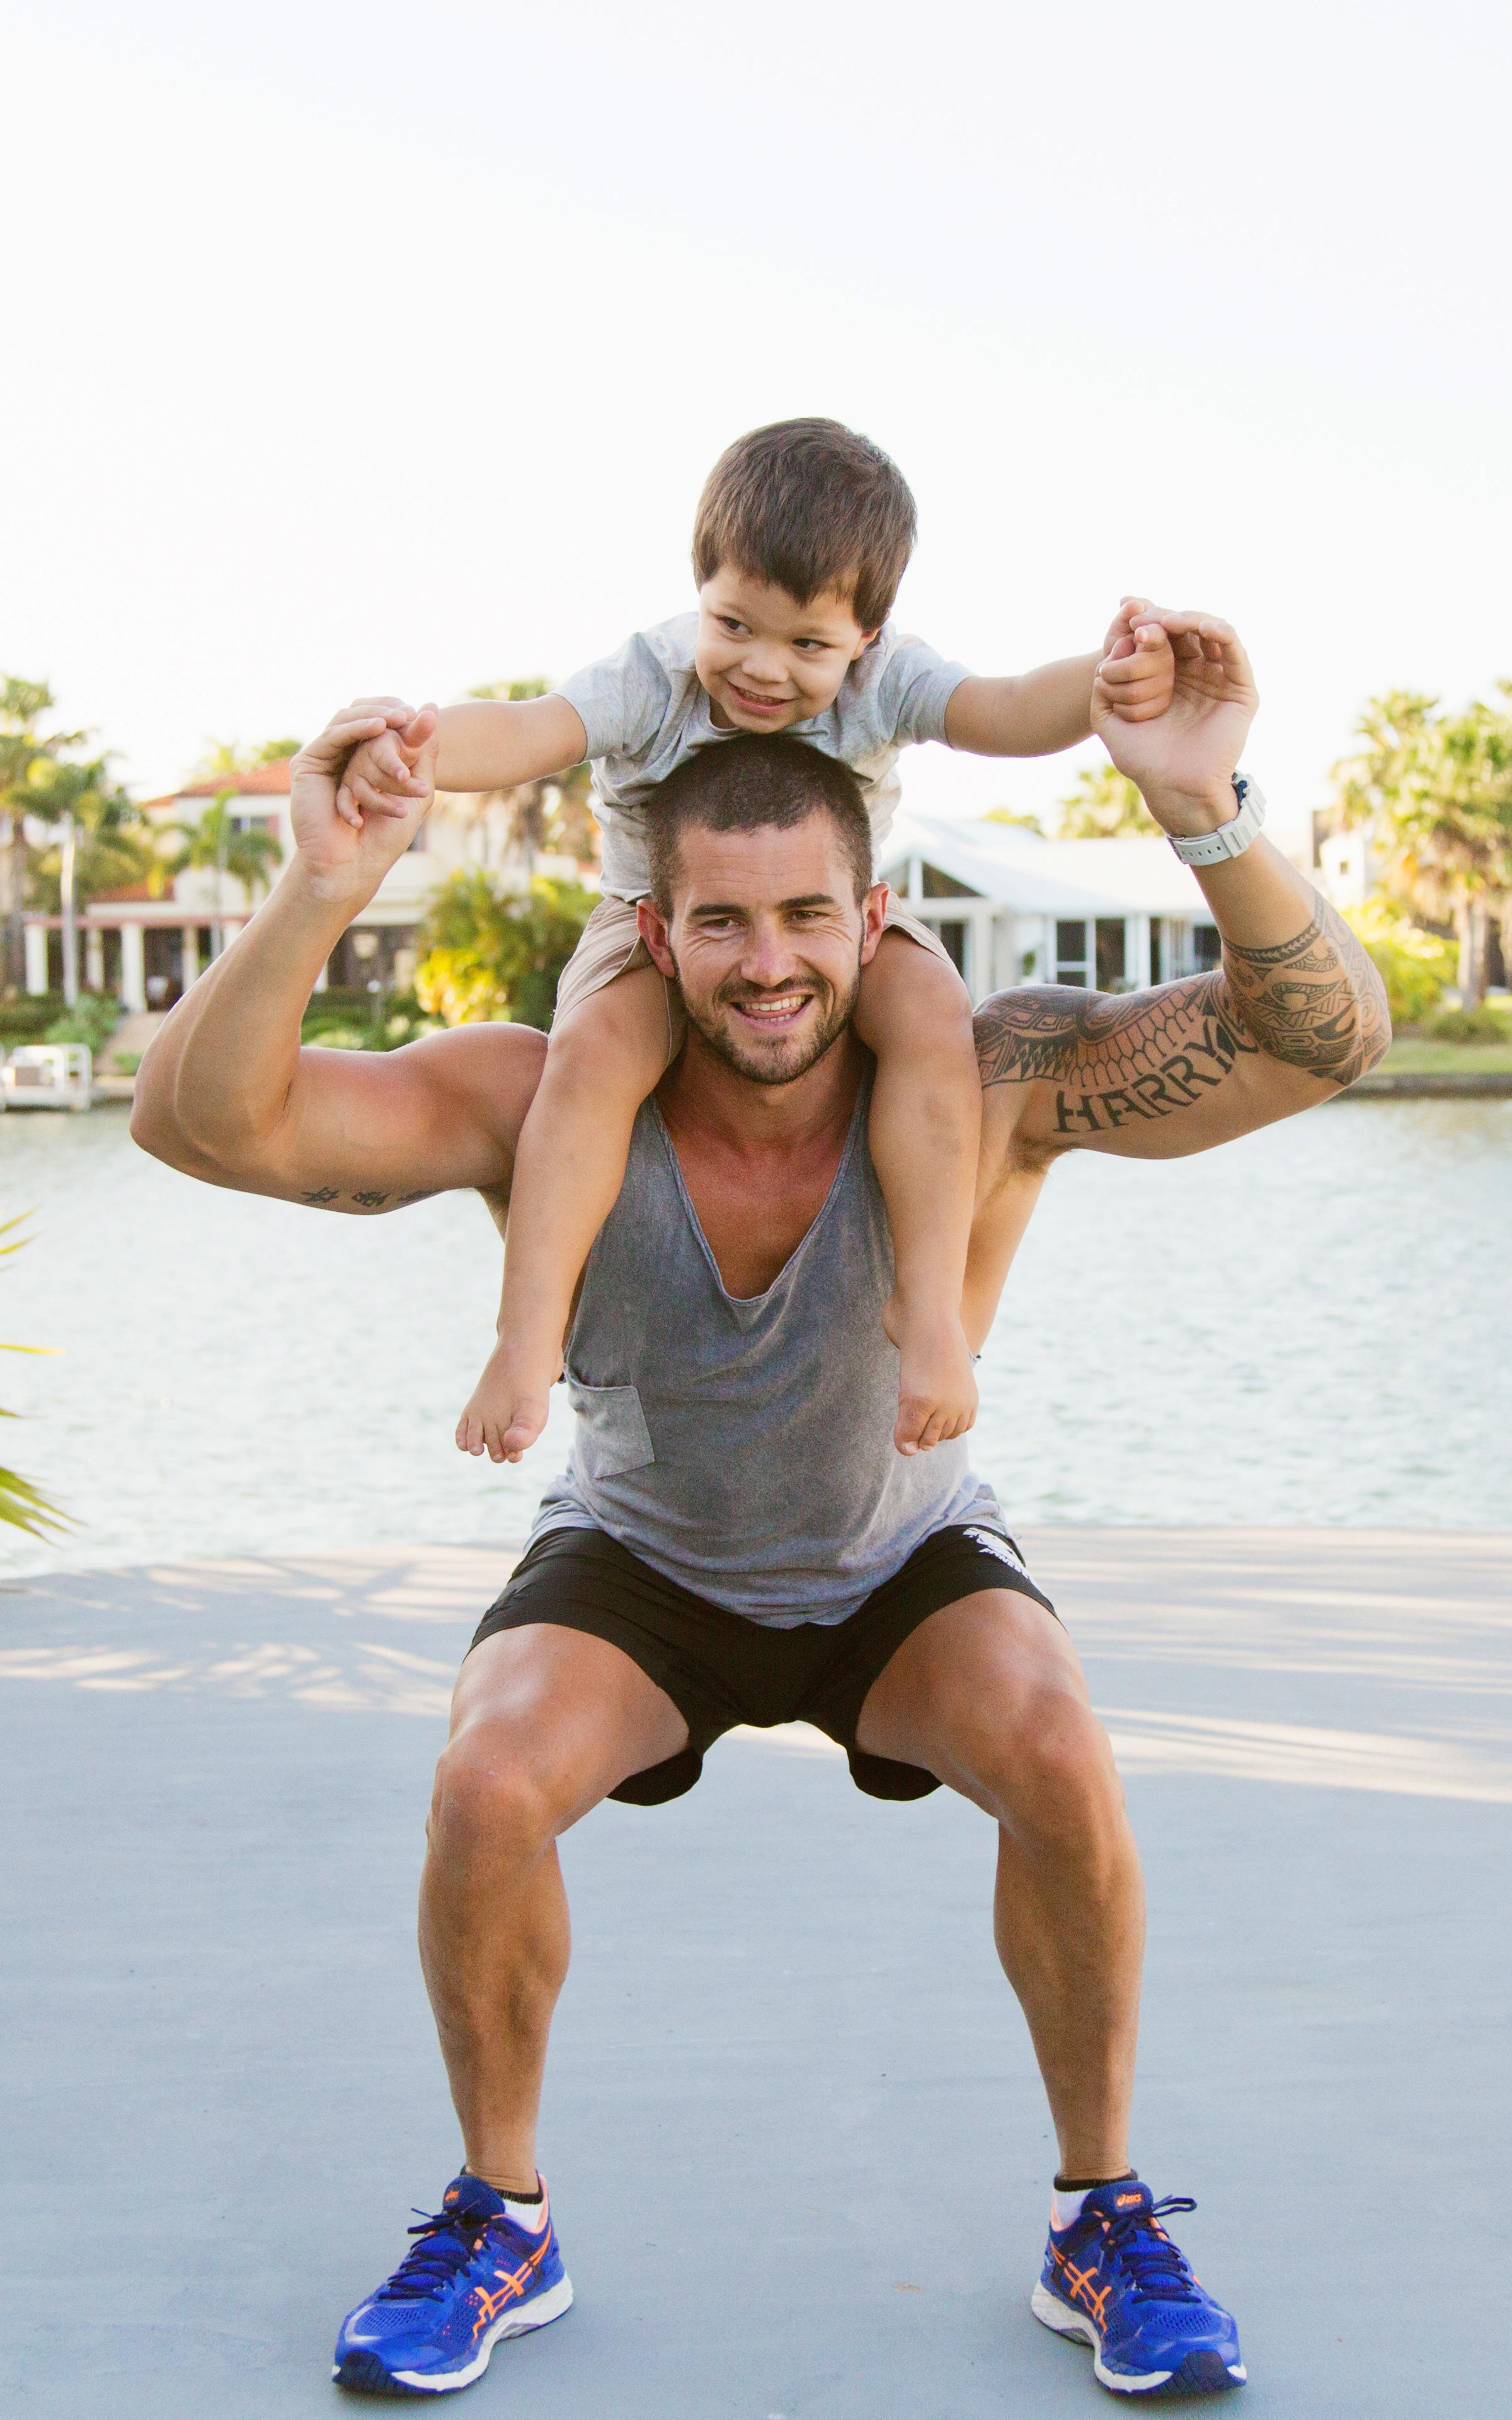 Beautiful News - Man with child on his shoulders